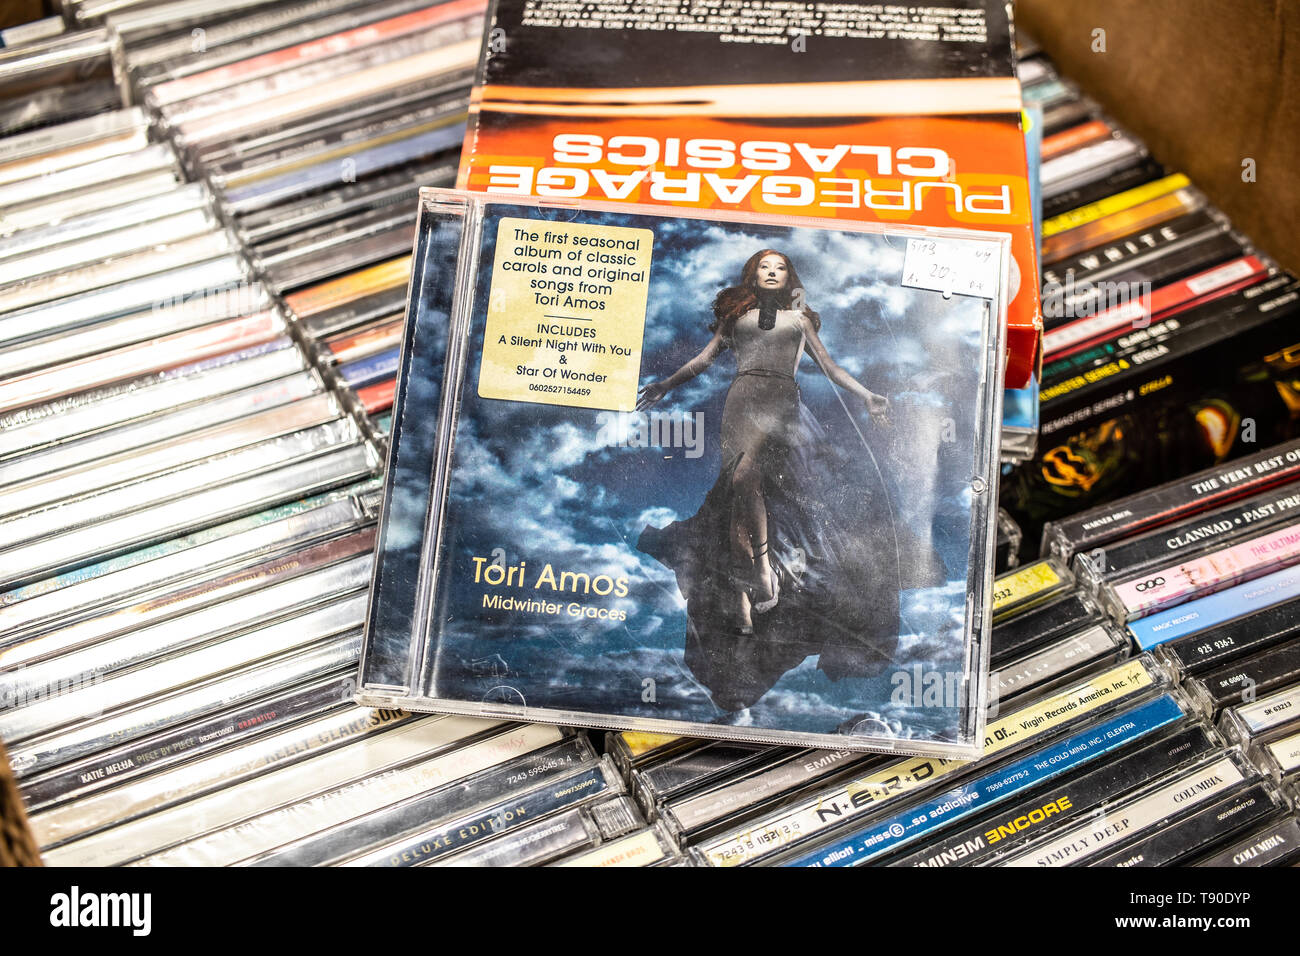 Nadarzyn, Poland, May 11, 2019: Tori Amos CD album Midwinter Graces 2009 on display for sale, famous American singer-songwriter and pianist, Stock Photo